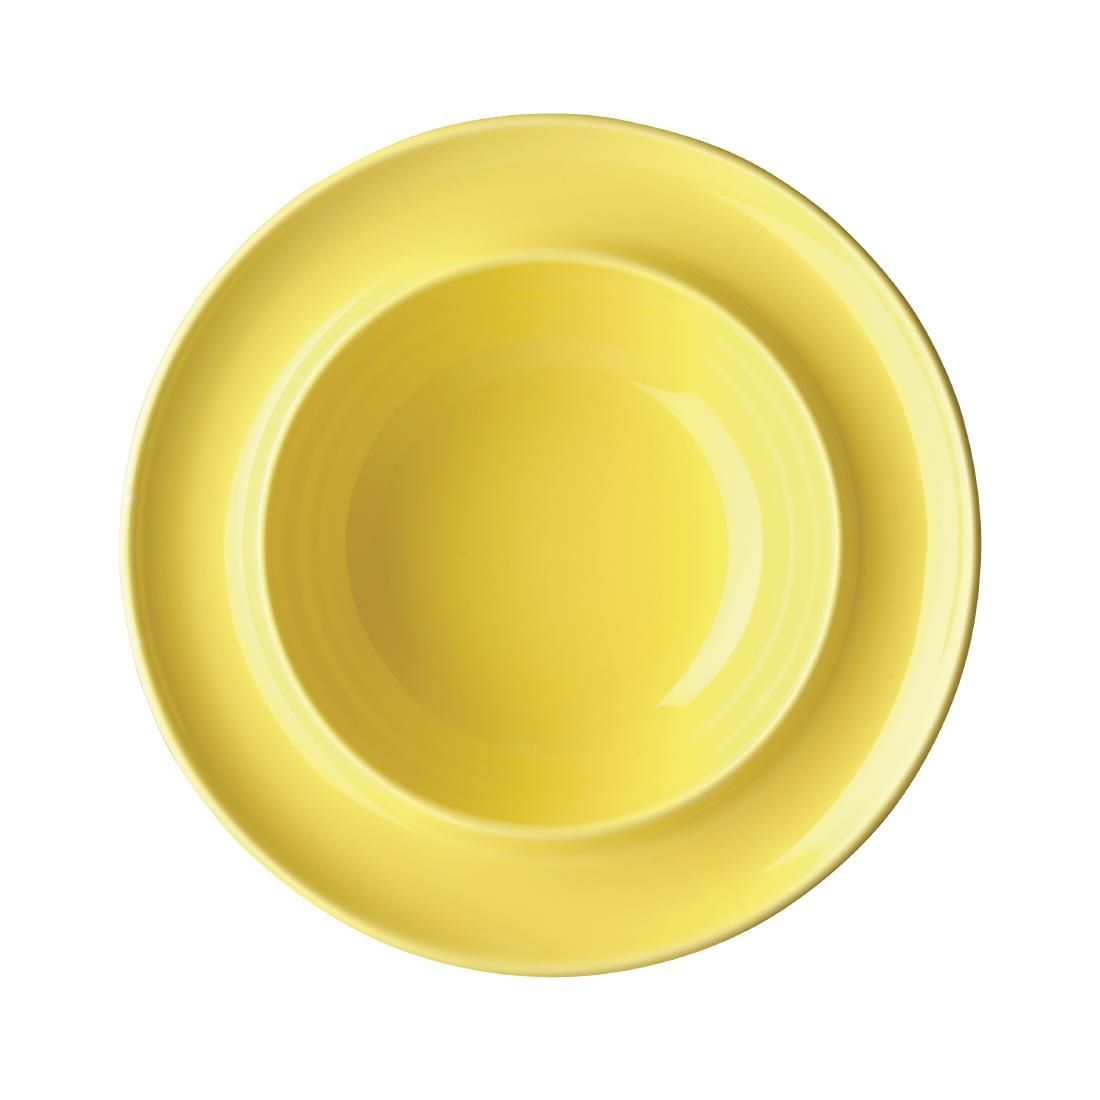 DW148 Olympia Heritage Raised Rim Bowls Yellow 205mm (Pack of 4)